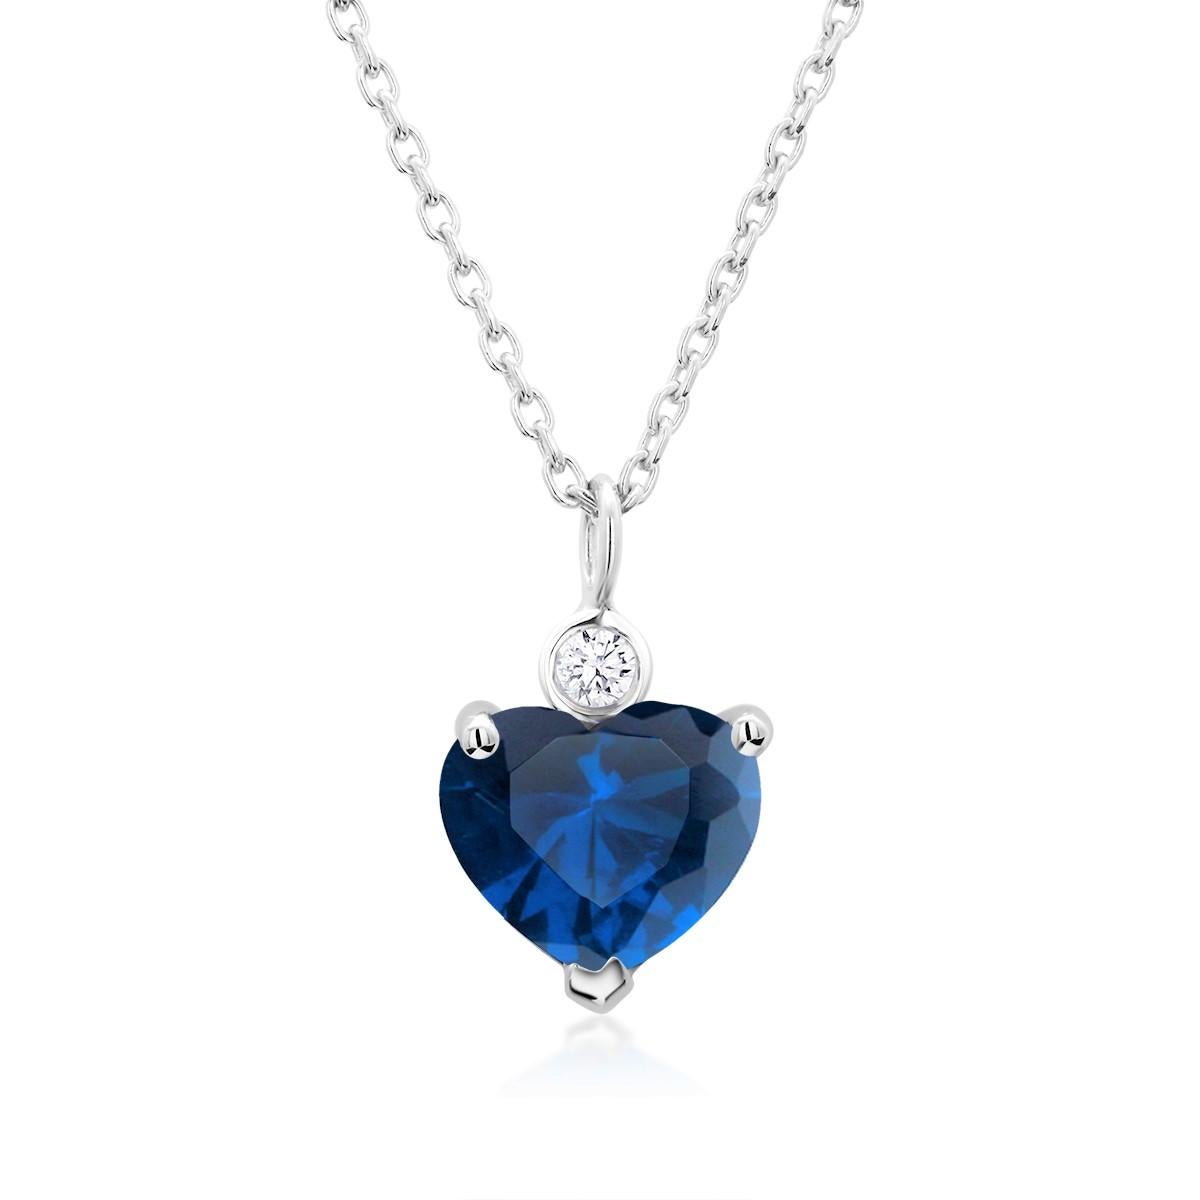 Fourteen karats white gold trending layered necklace pendant with hanging heart shape sapphire and diamond
Heart shape sapphire weighing 1.04 carat
The heart-shaped sapphire hue tone color is royal blue 
One diamond weighing 0.04 carats
Chain